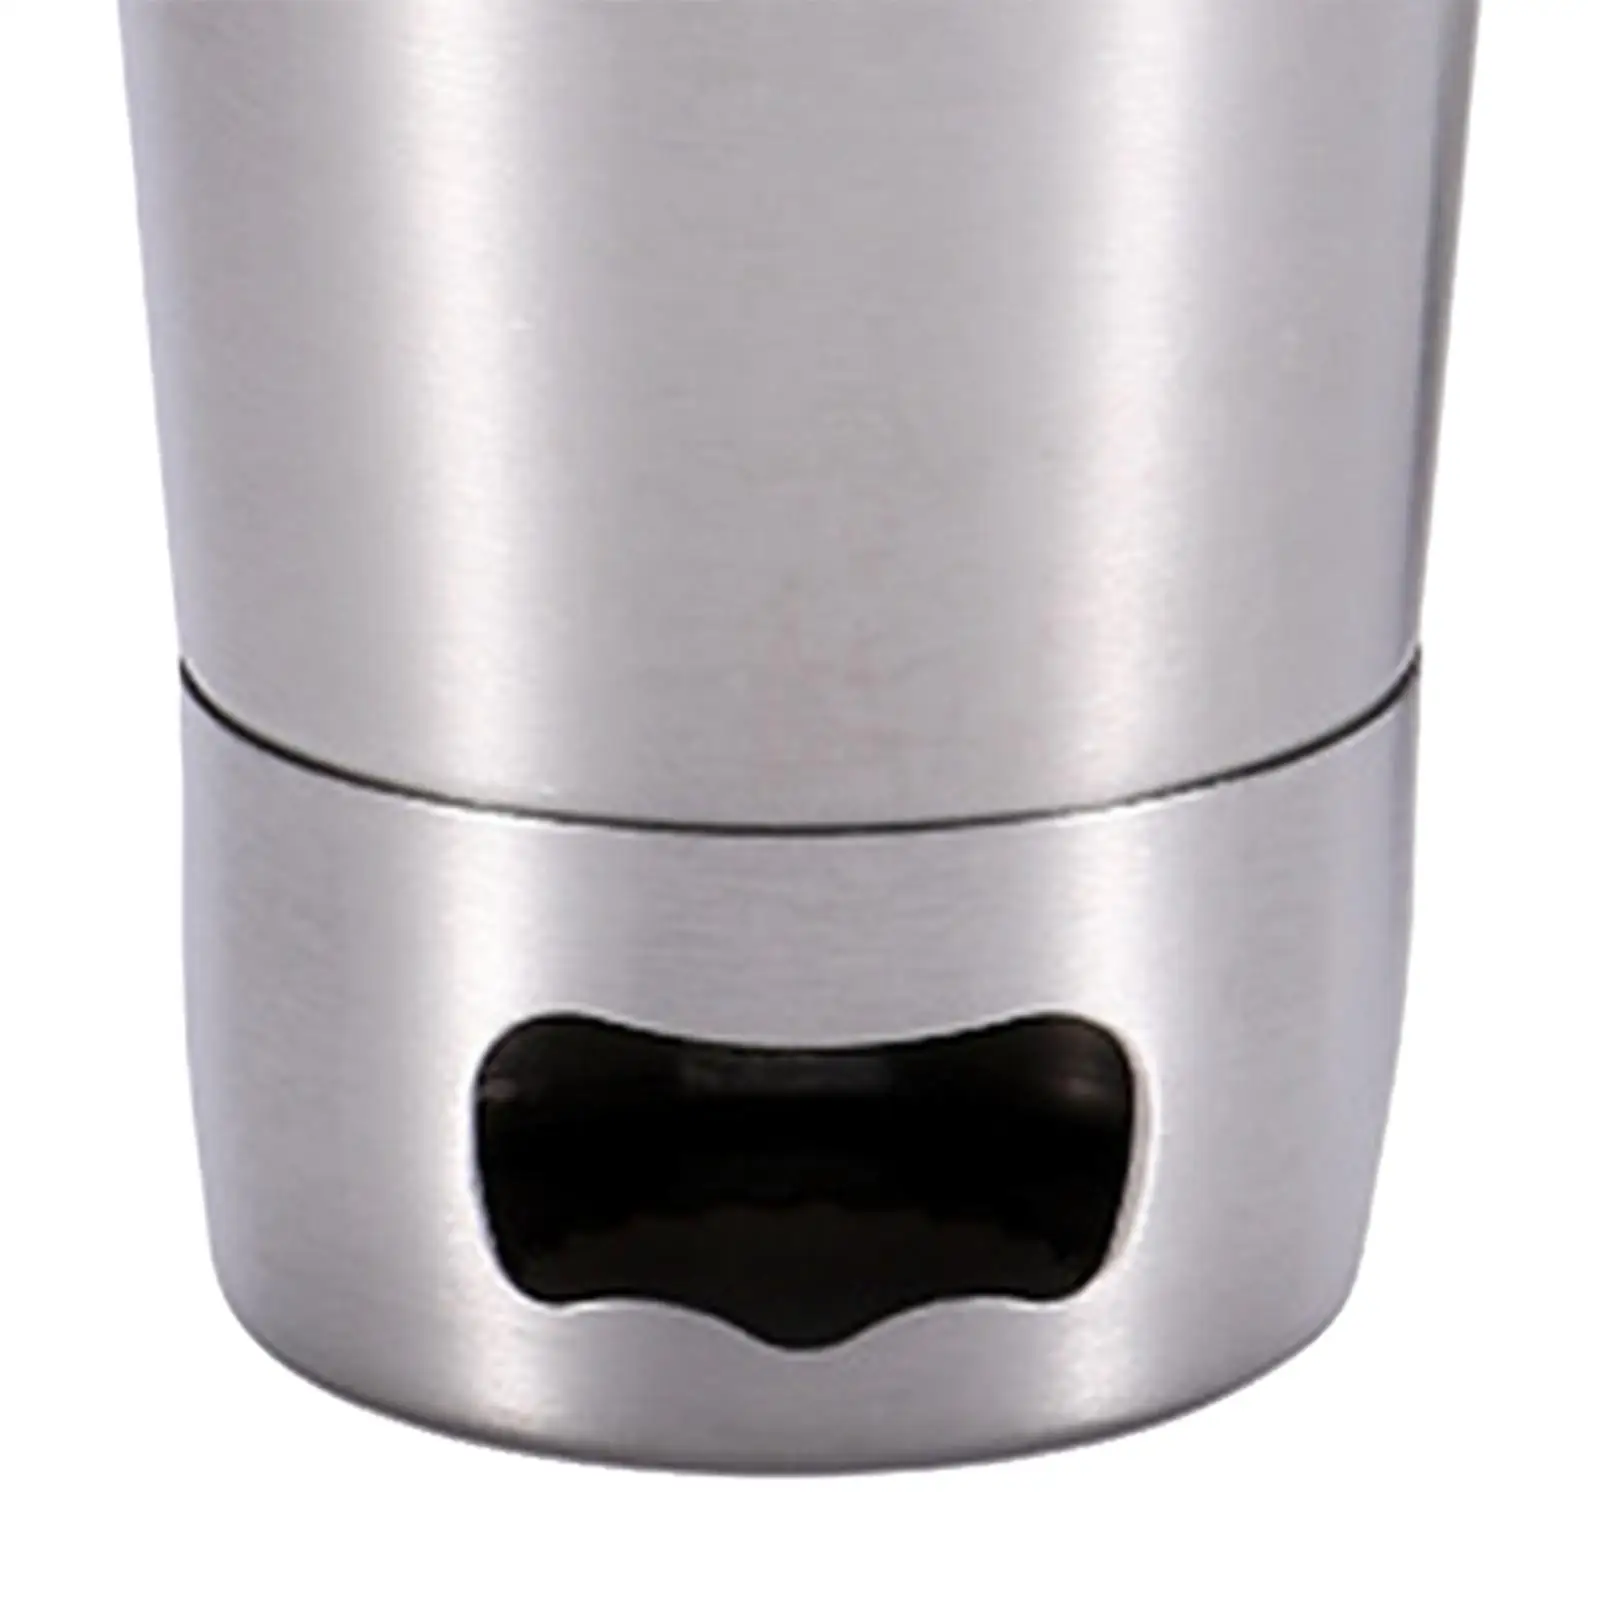 Stainless Steel beers Mug with Bottle Opener 500ml Unbreakable Convenient Durable Stainless Steel Tumbler Adults Home